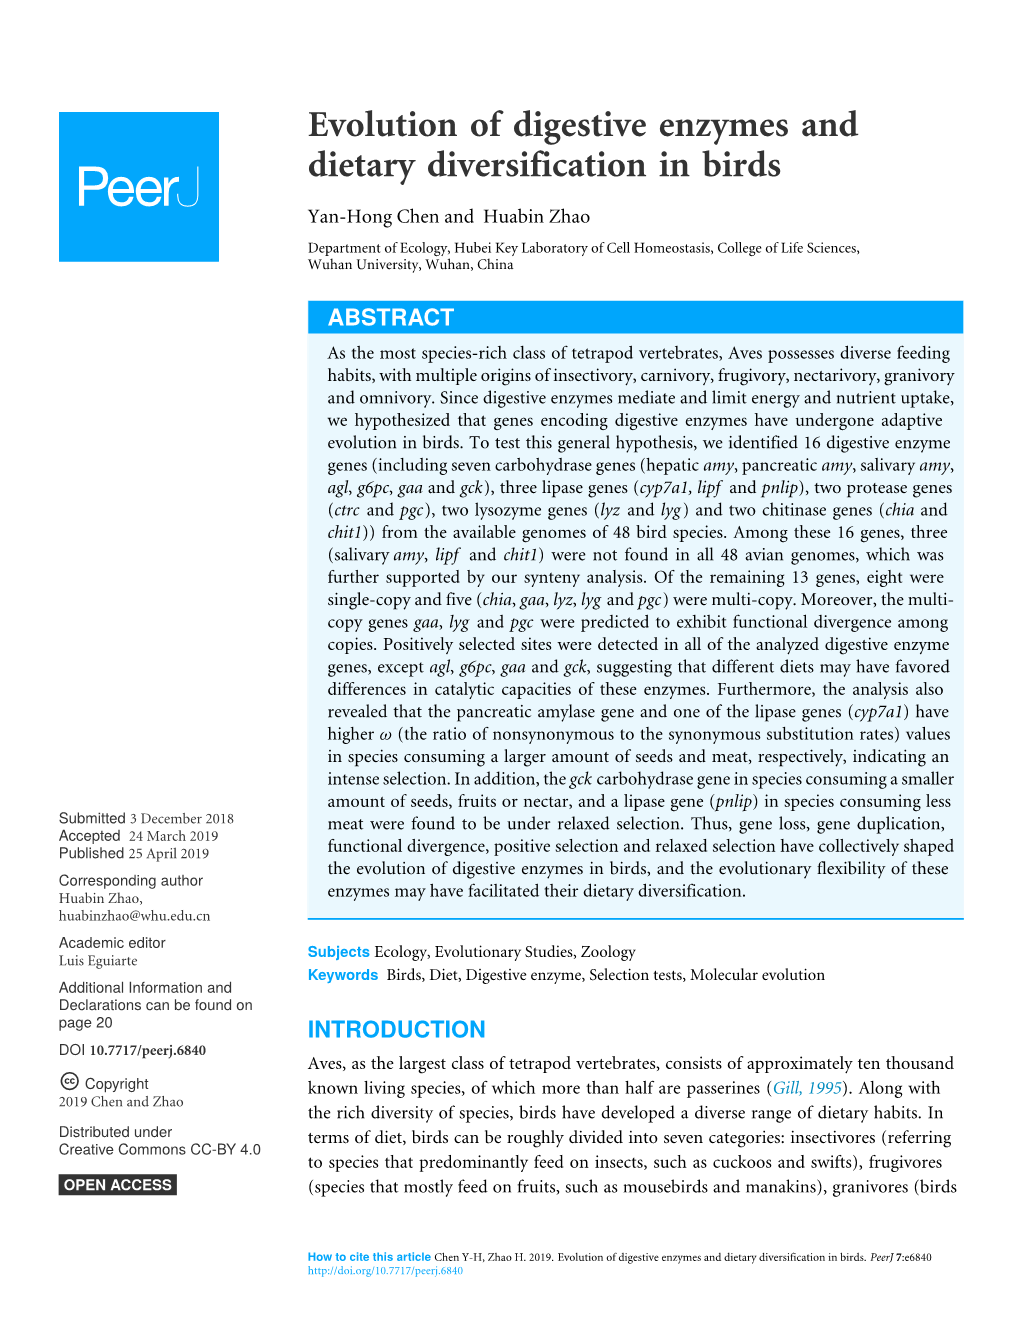 Evolution of Digestive Enzymes and Dietary Diversification in Birds